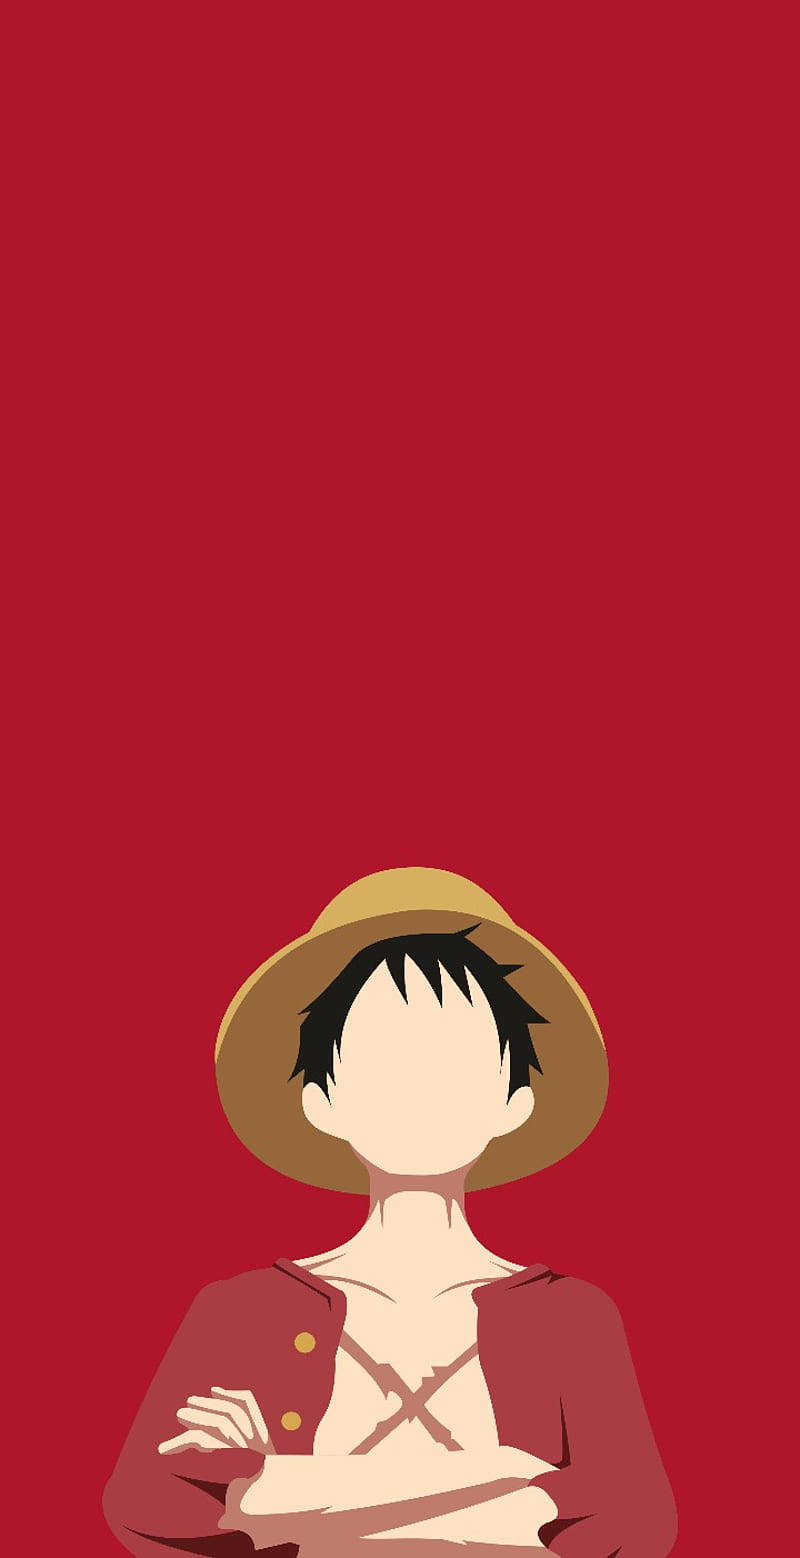 Top 999+ Luffy Aesthetic Wallpaper Full HD, 4K✅Free to Use